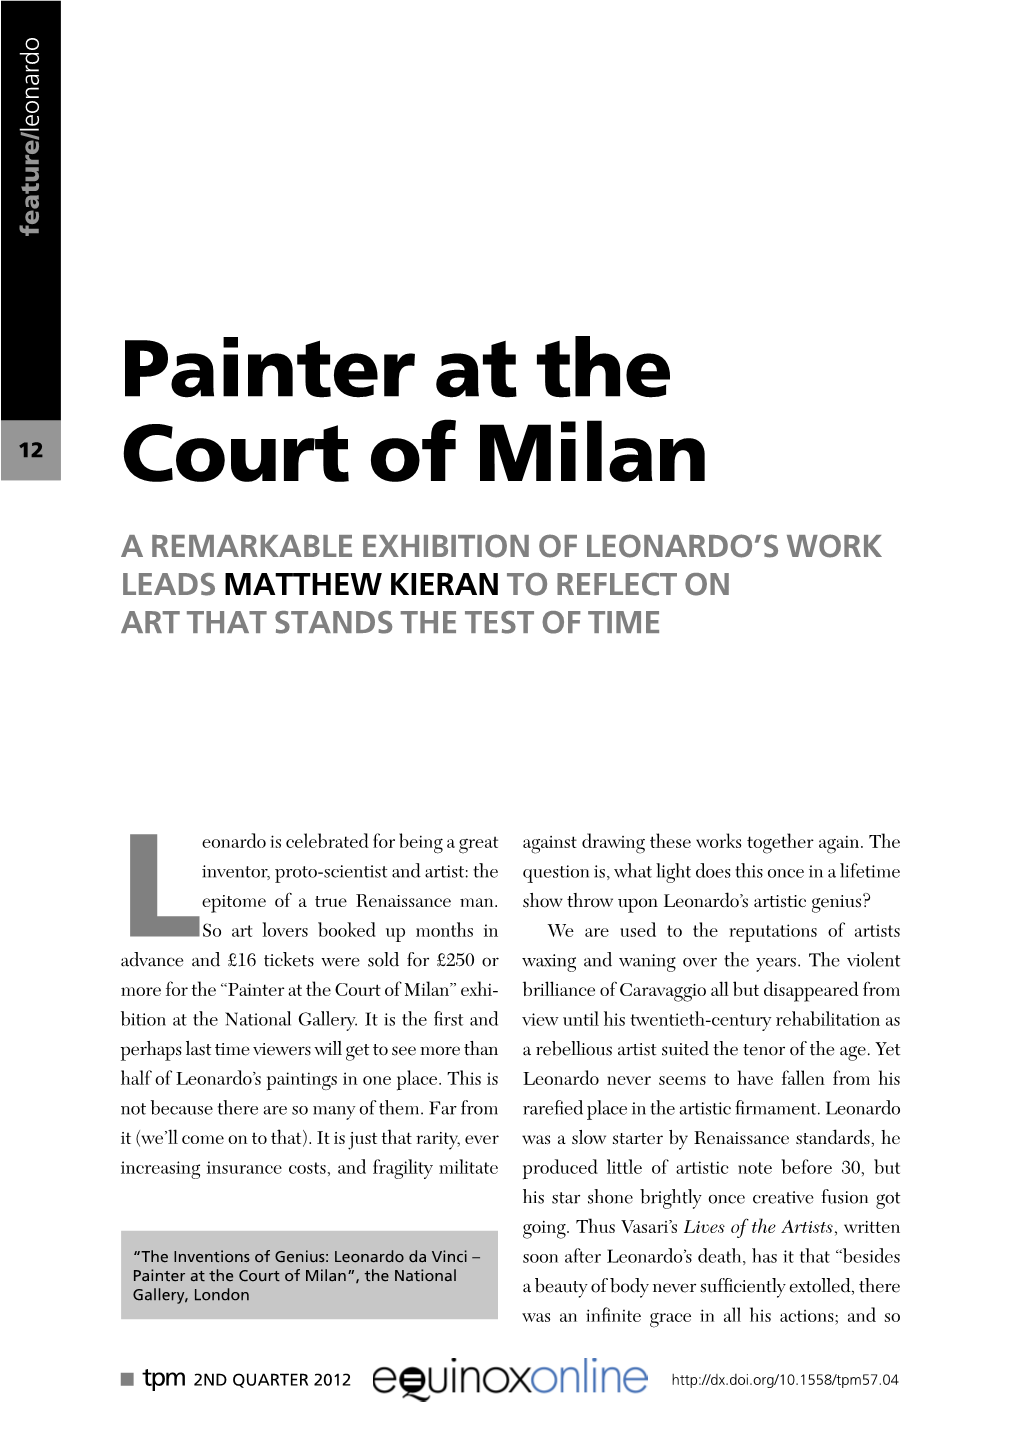 Painter at the Court of Milan” Exhi- Brilliance of Caravaggio All but Disappeared from Bition at the National Gallery